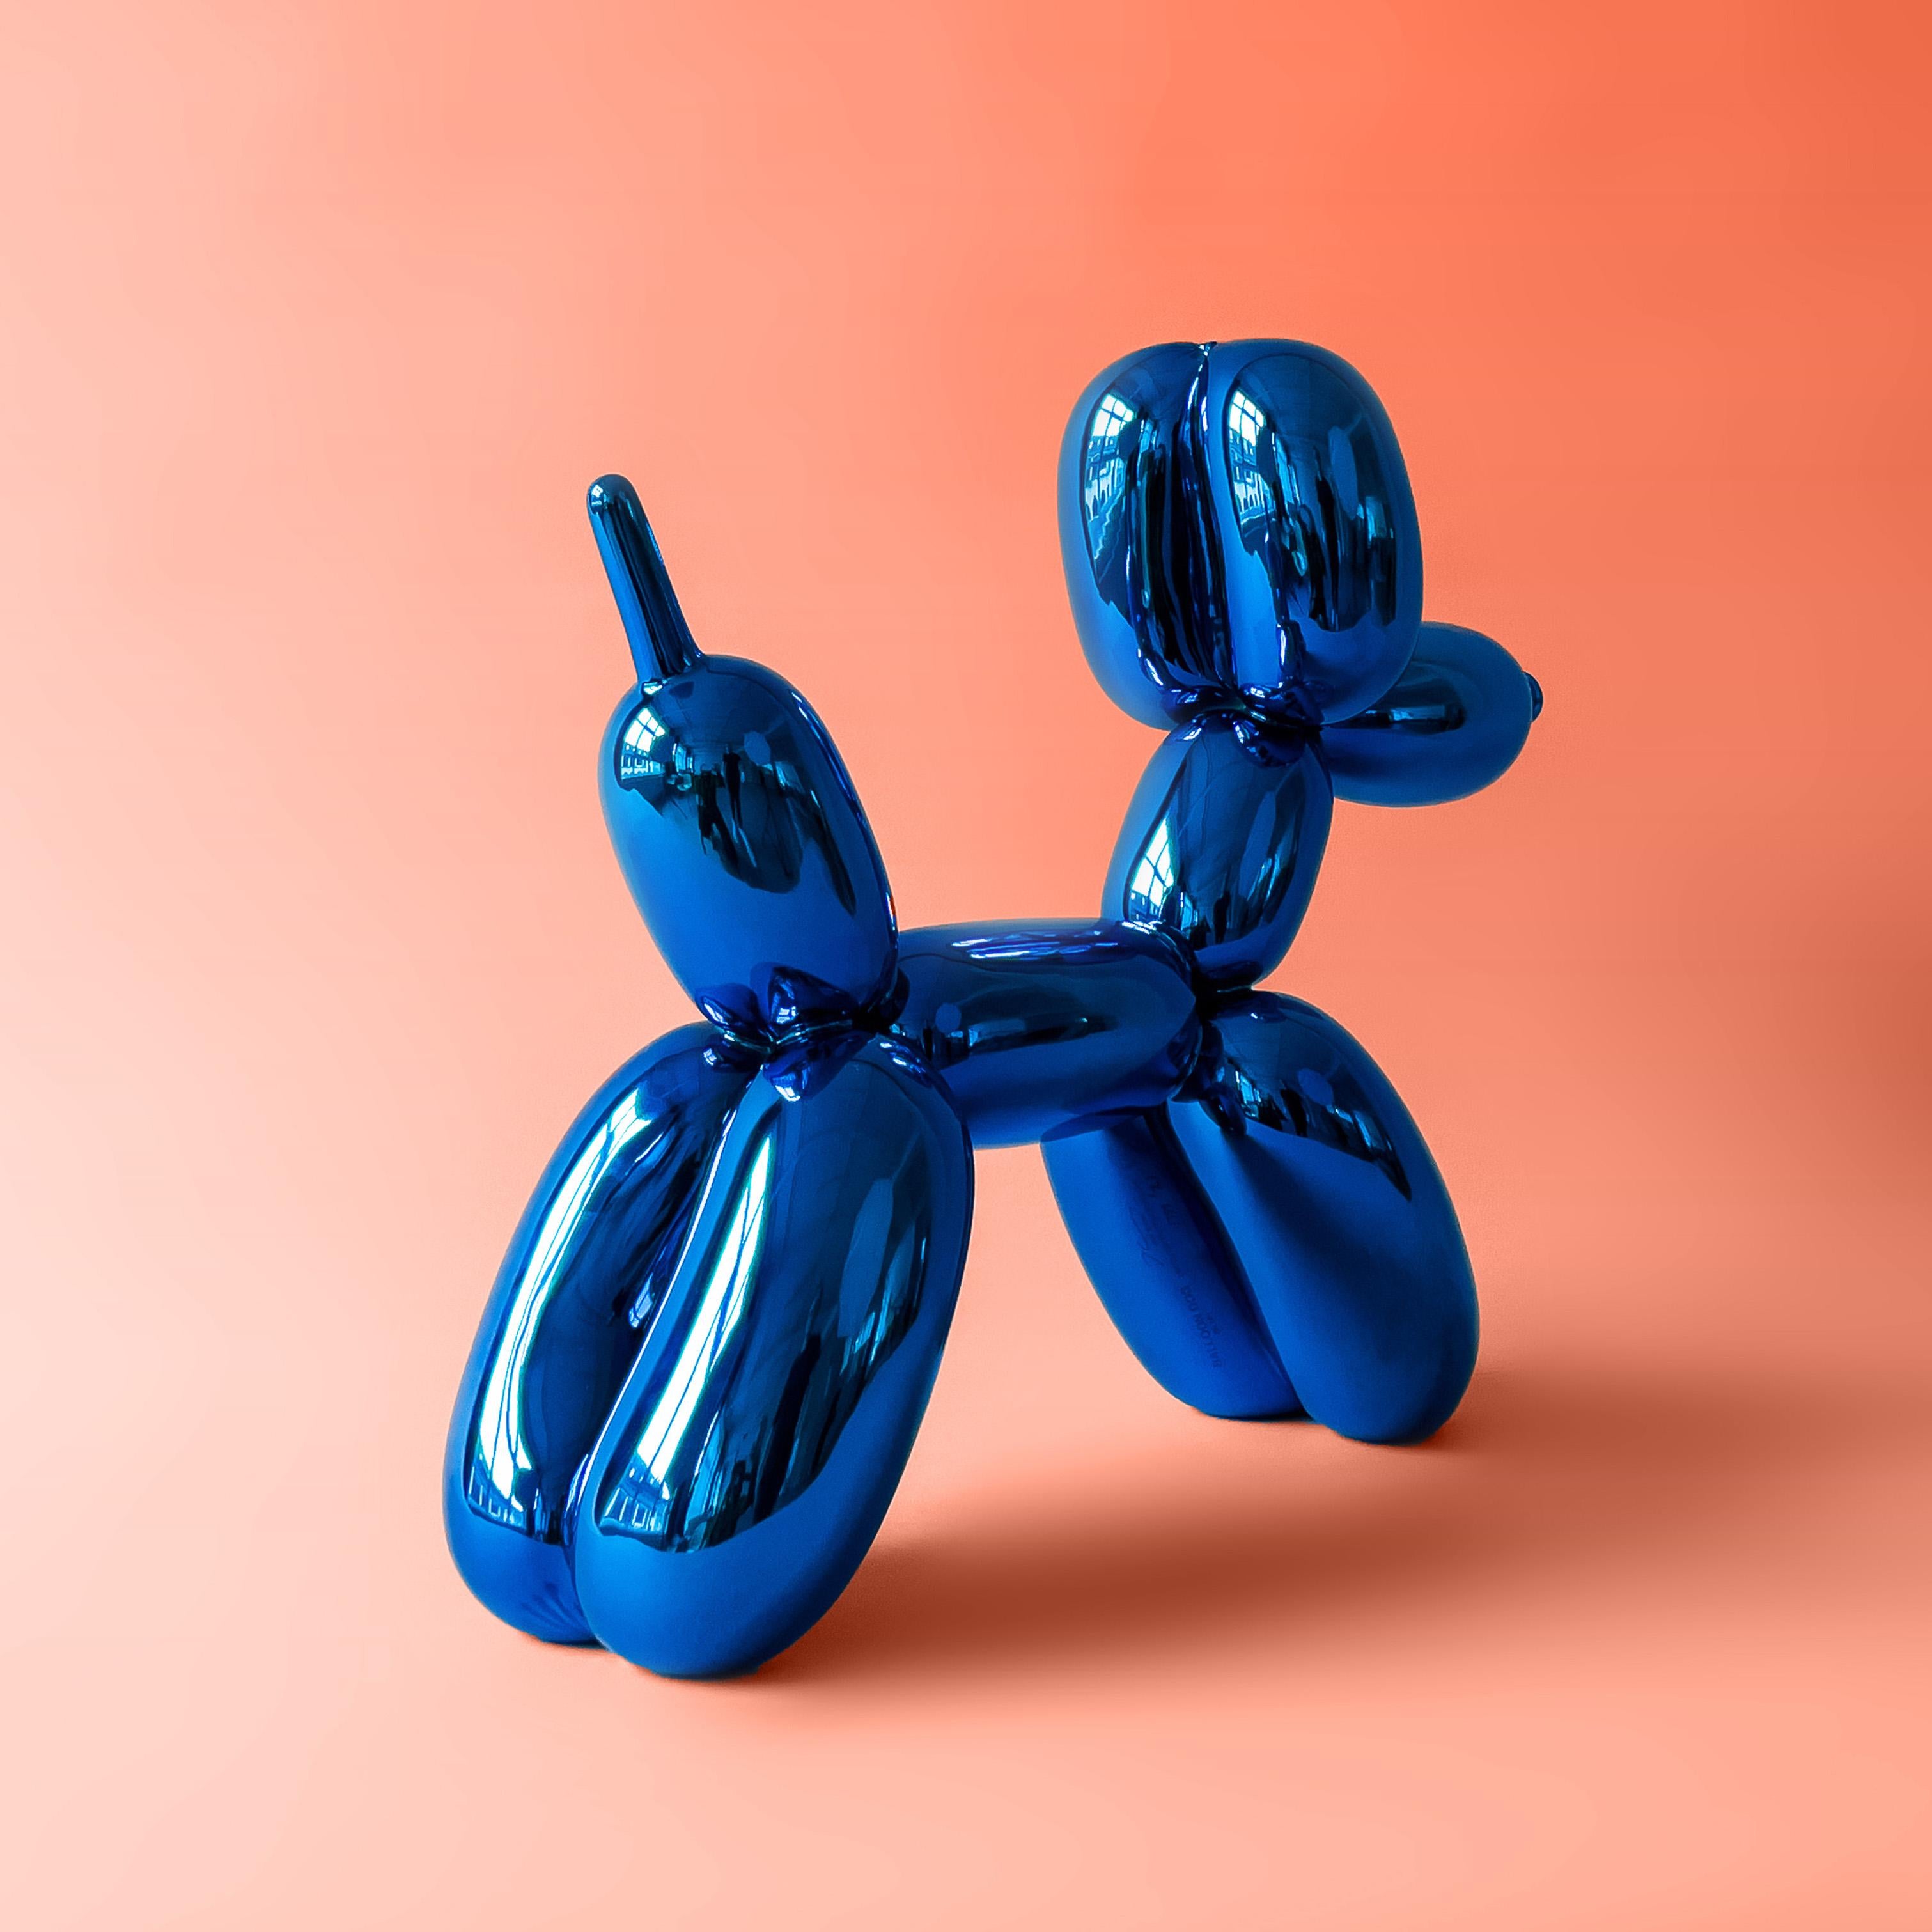 Jeff Koons
Balloon Dog (Blue) - Jeff Koons, 21st Century, Contemporary, Porcelain, Sculpture, Decor, Limited Edition

Limoges porcelain with chromatic coating
Edition of 799
40 × 48 × 15.8 cm
(15.75 × 18.90 × 6.22 in)
Signed and numbered
In mint